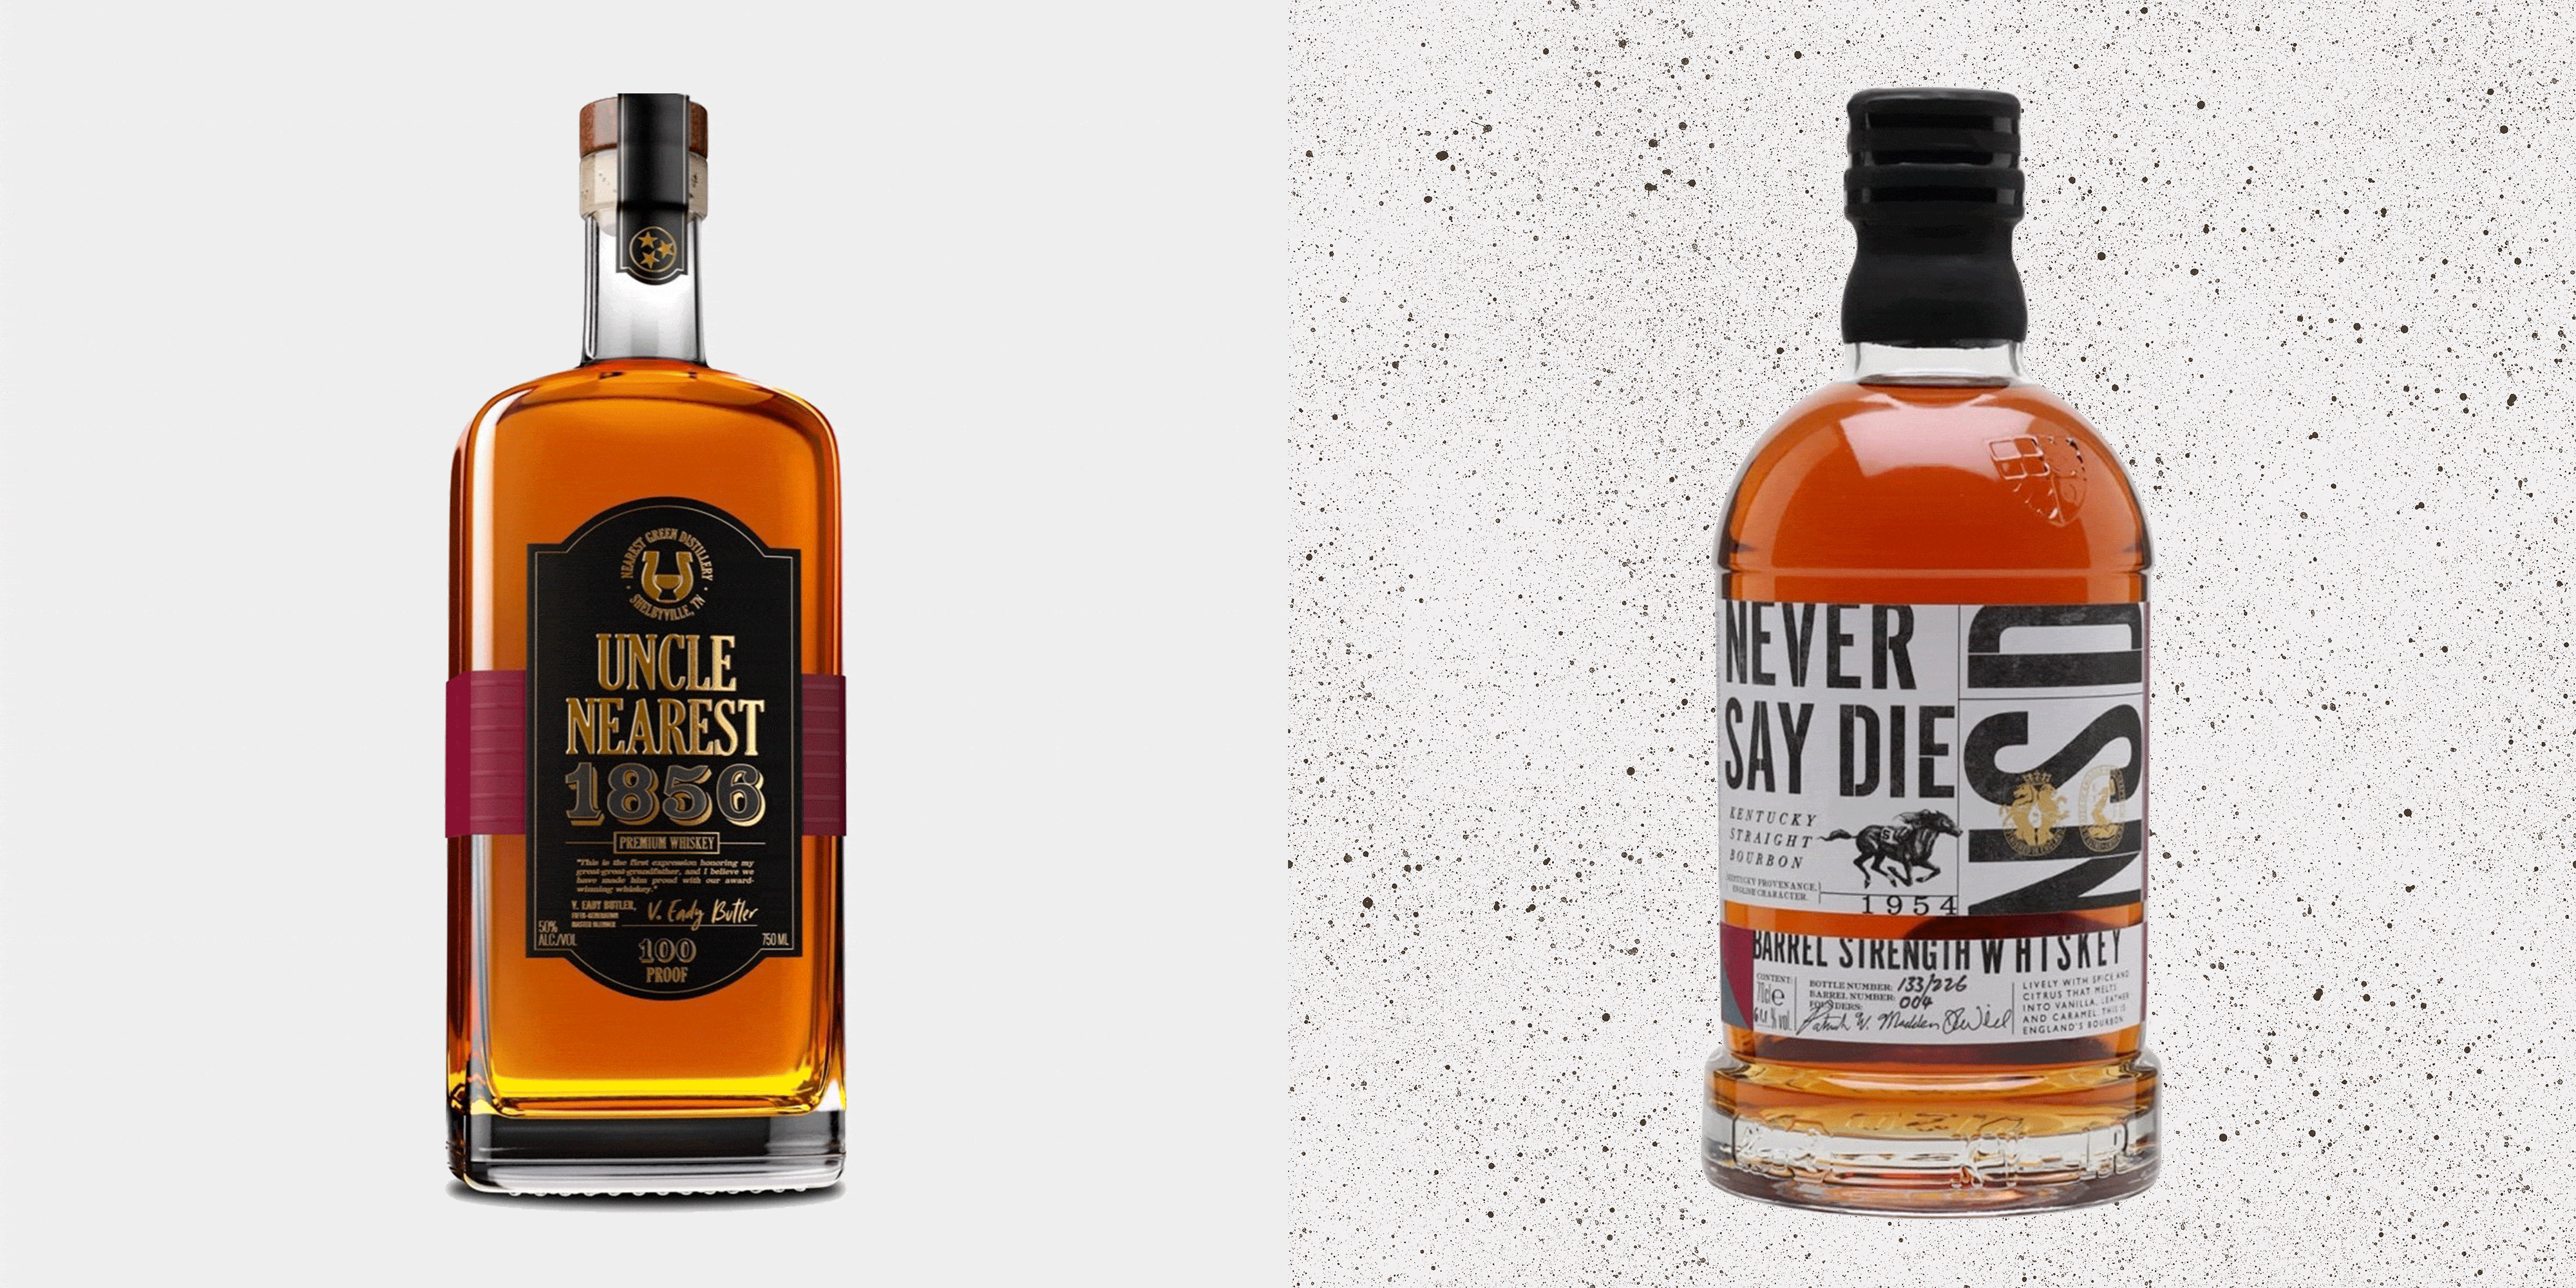 7 Best Bourbon Whiskies To Buy, According to Experts